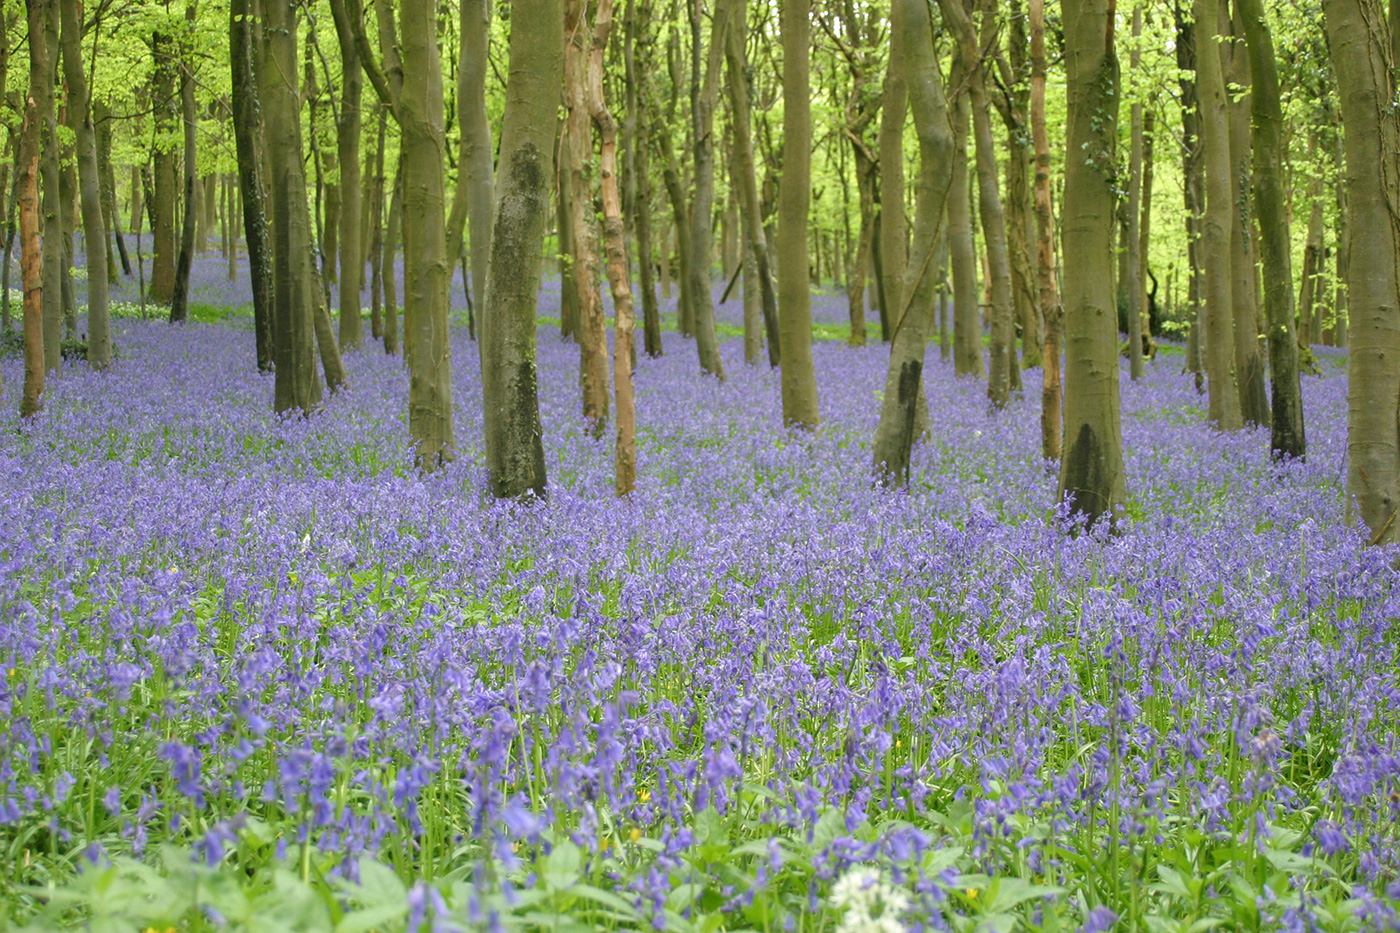 Bluebell Woods on the Purbeck Hills